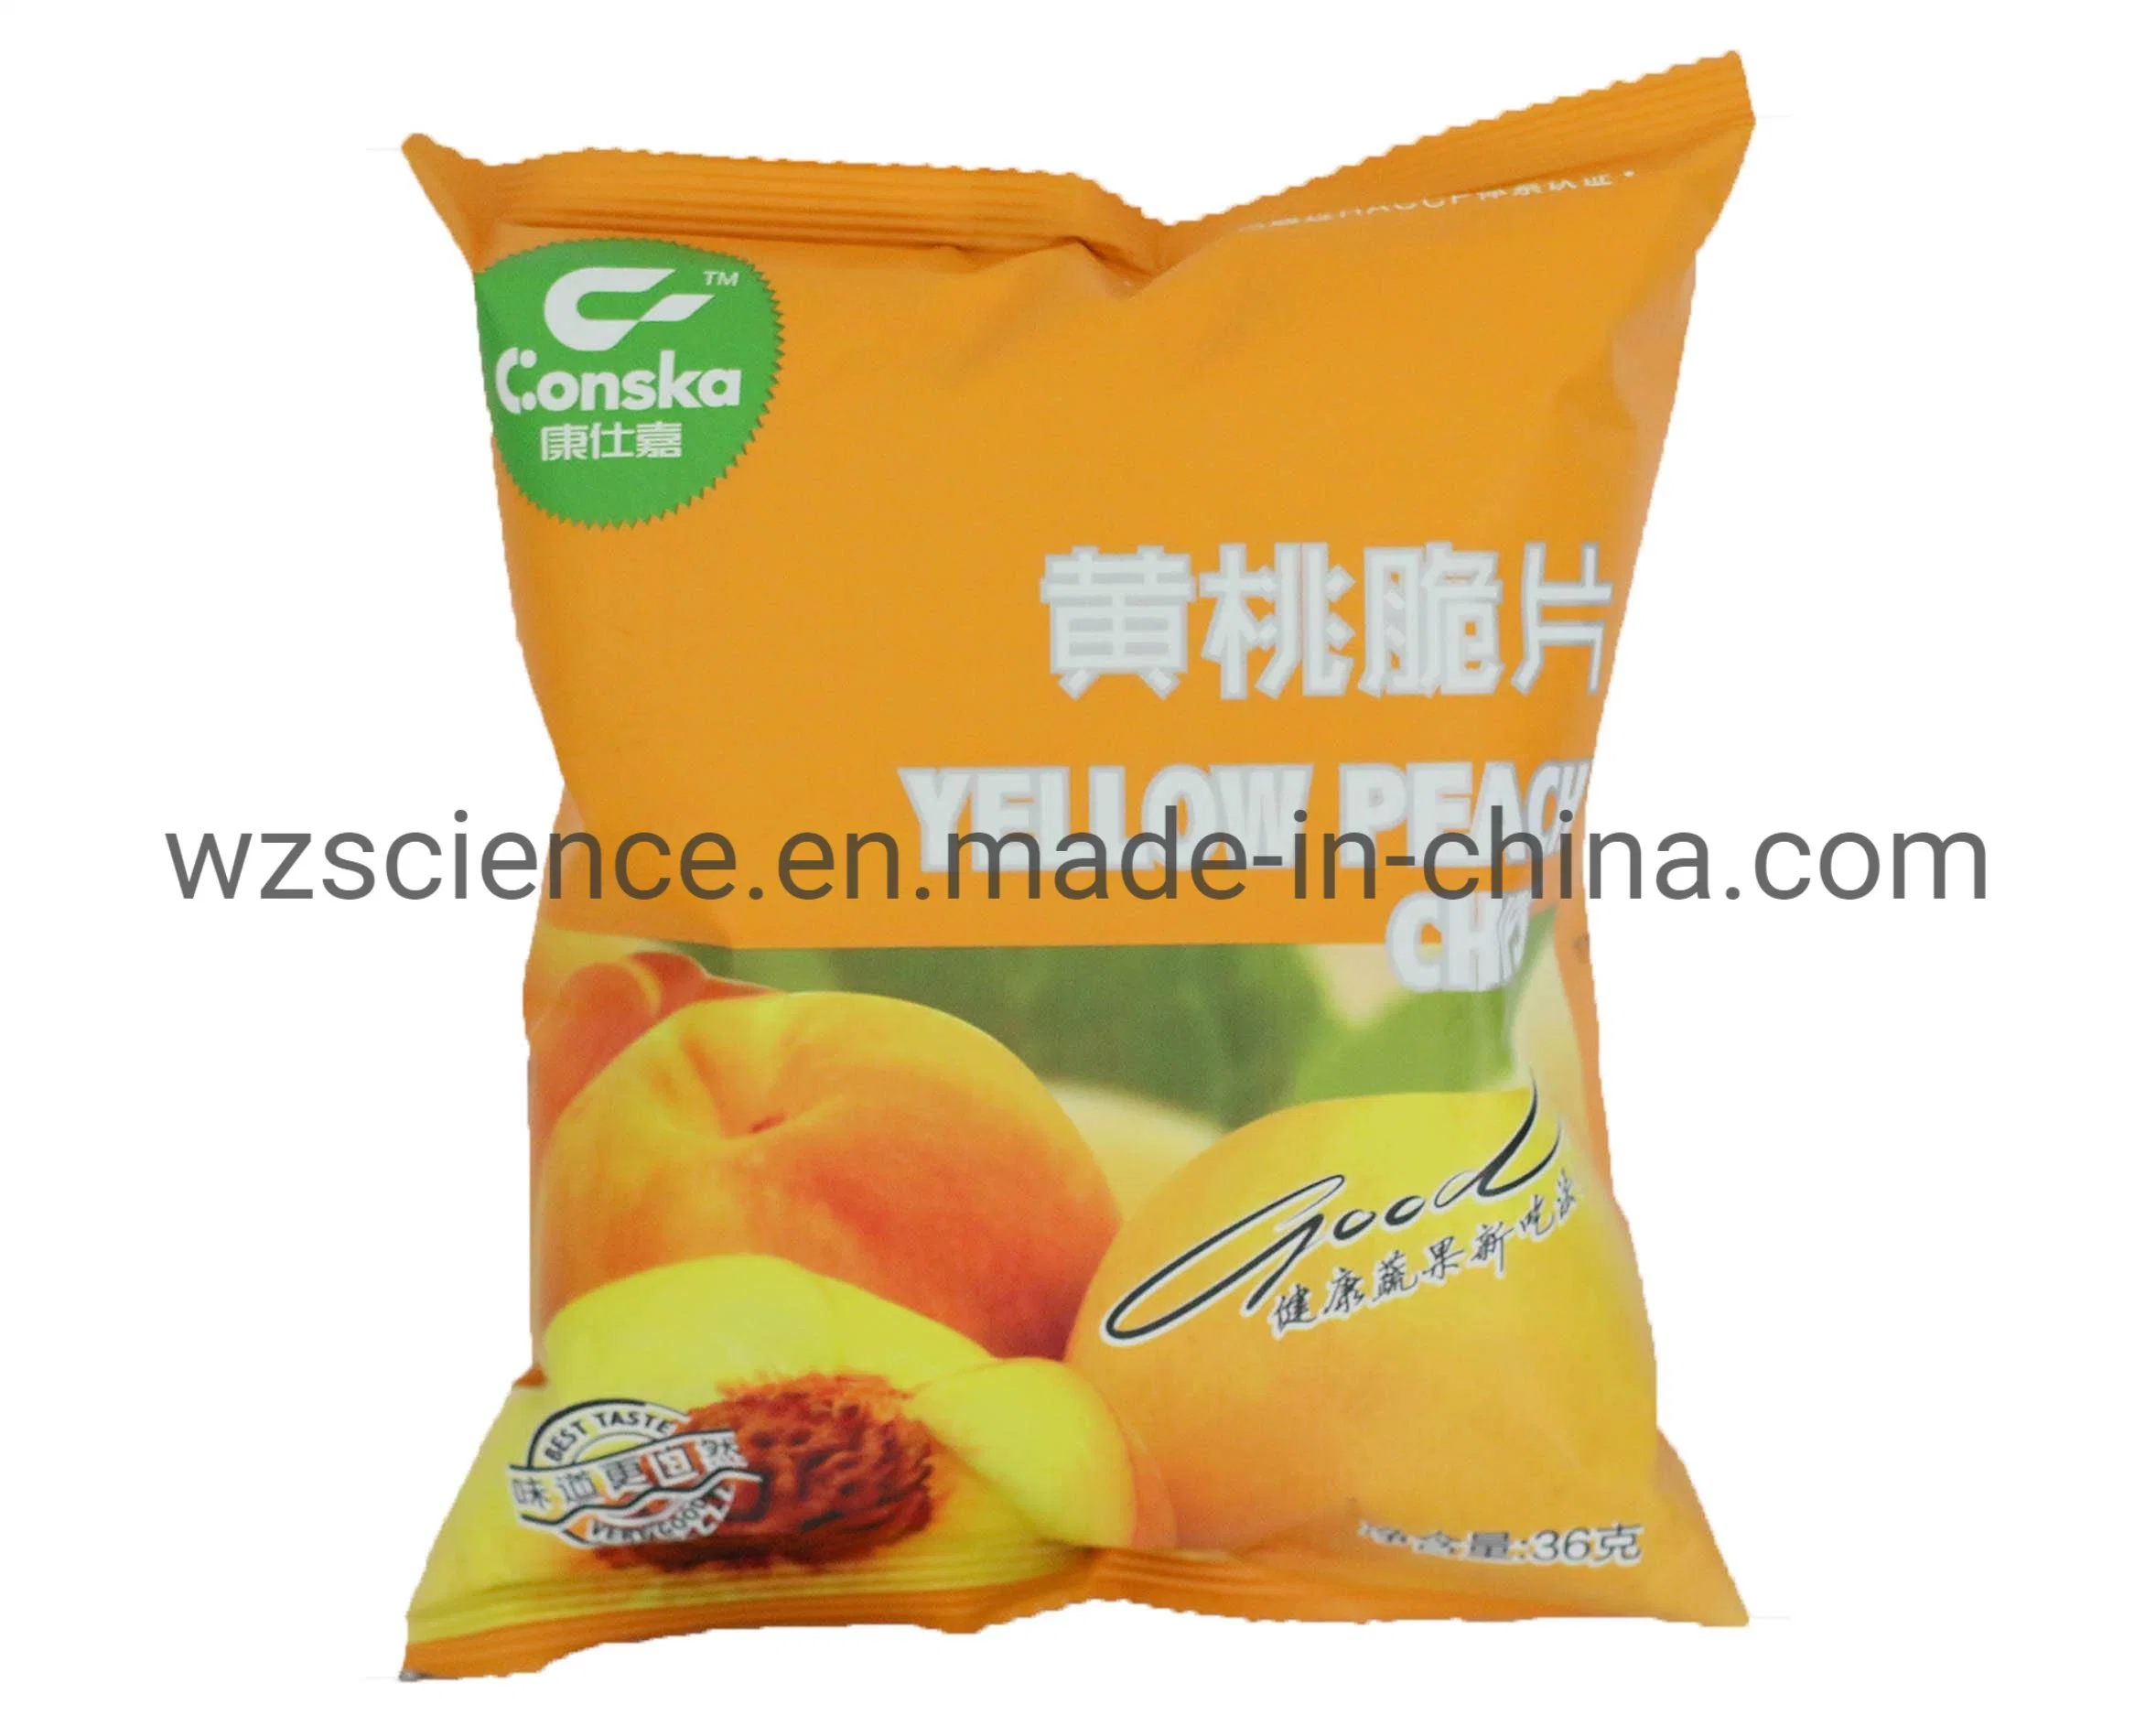 Automatic Vertical Valve Bag Packaging Machine